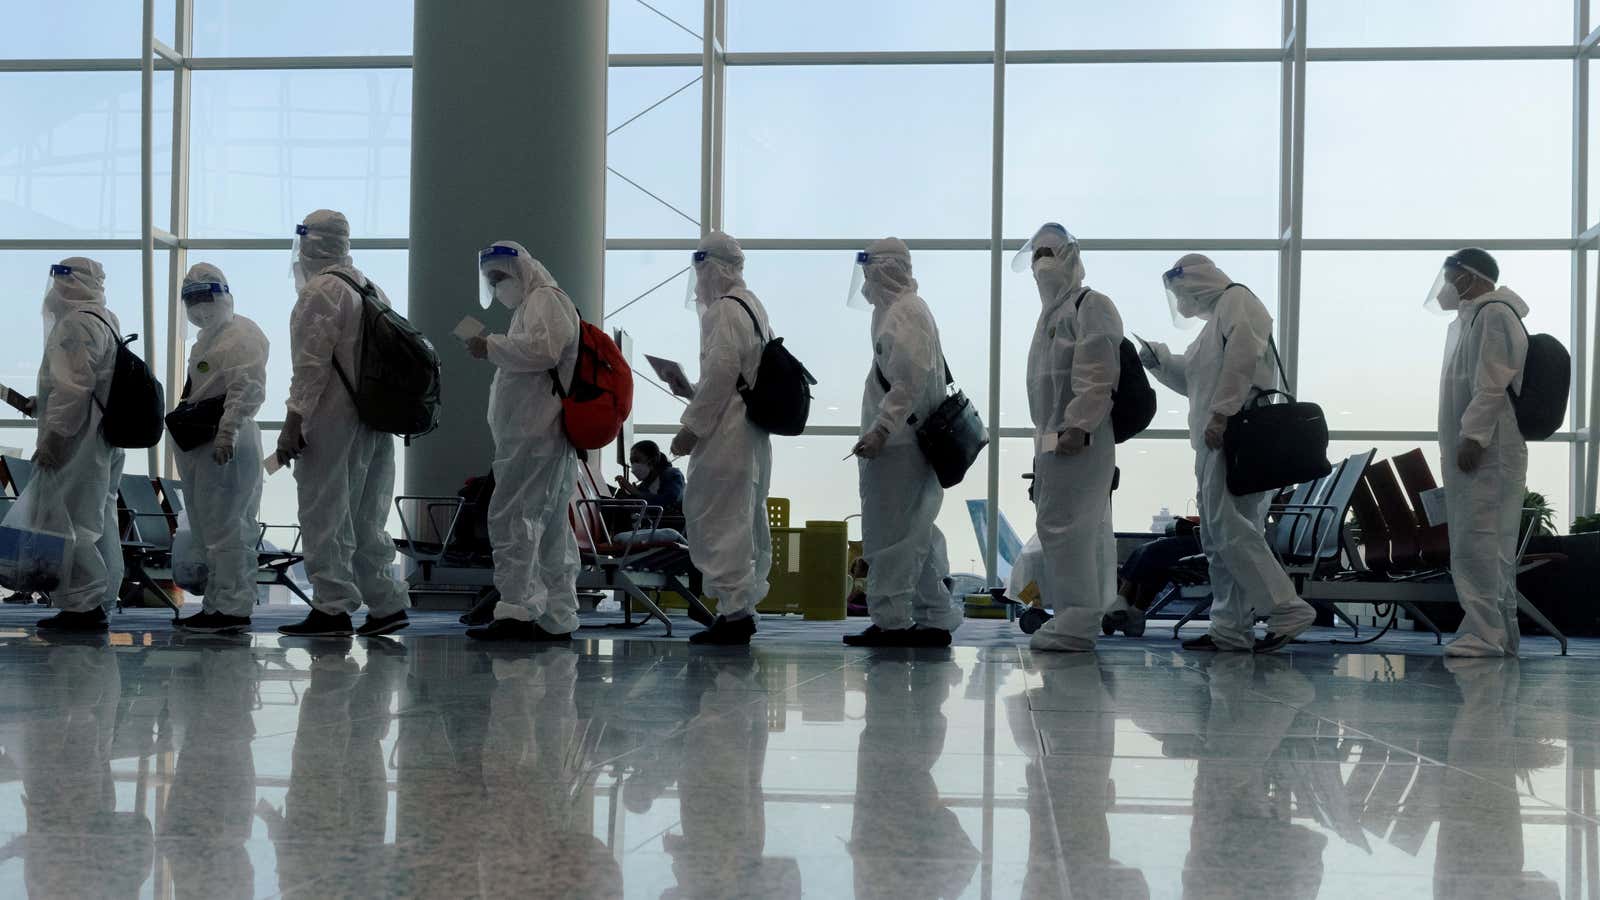 Passengers wearing protective suits (PPE) line up to board their plane for an international flight at Hong Kong airport in July 2021.